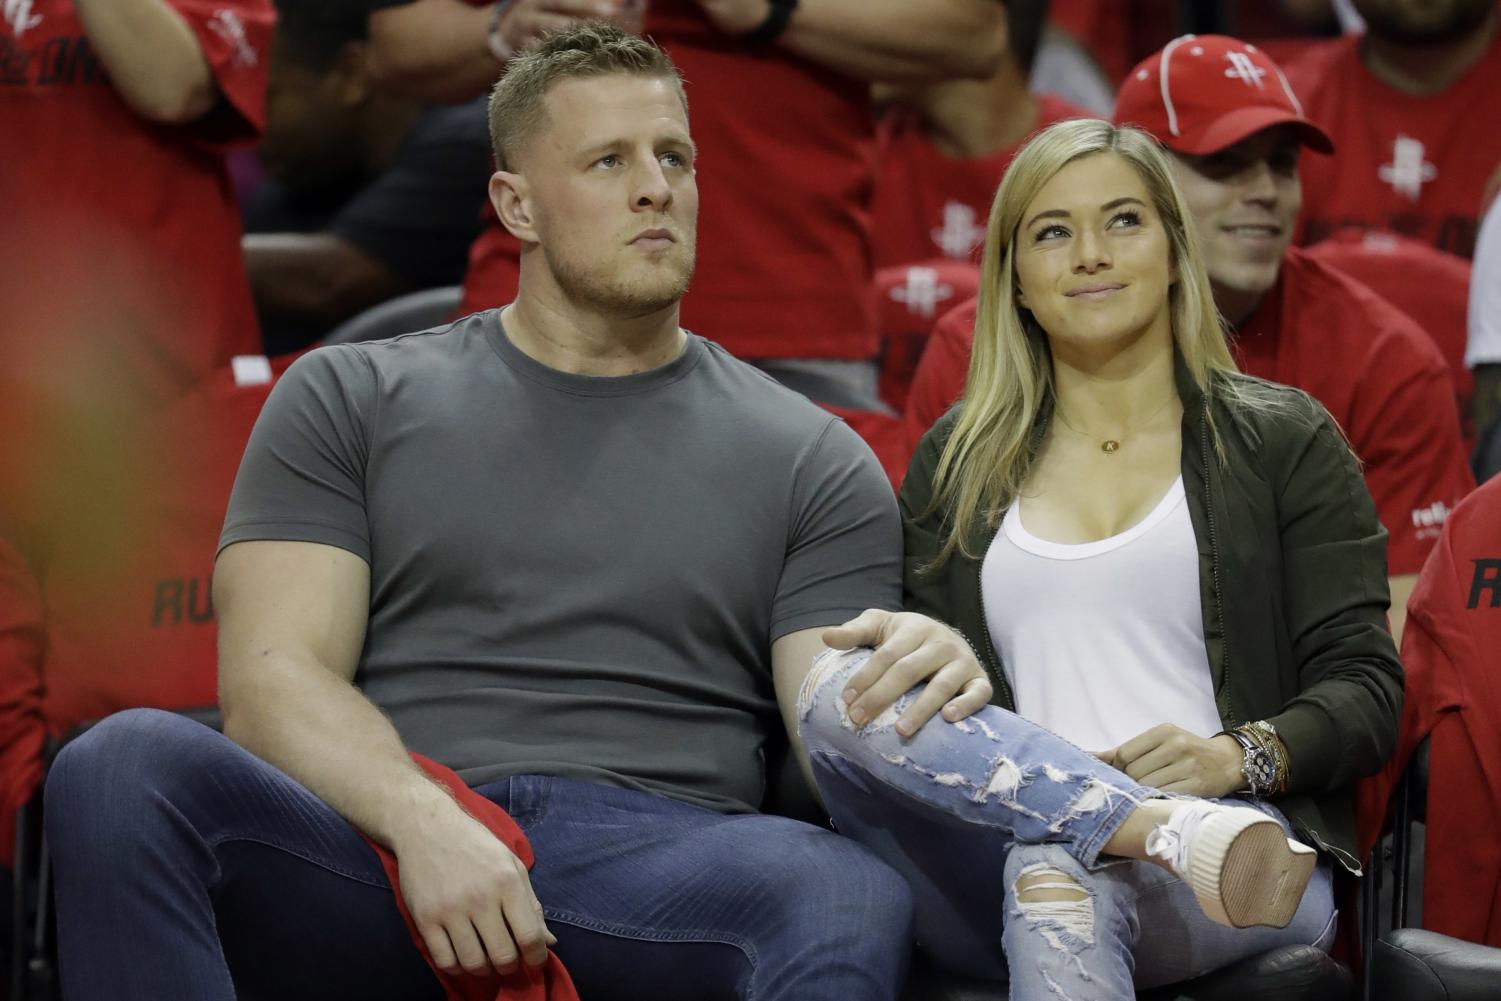 JJ Watt - Your recovery from this injury has inspired me, motivated me and  made me appreciate you even more than I already had! I could not be more  proud of you